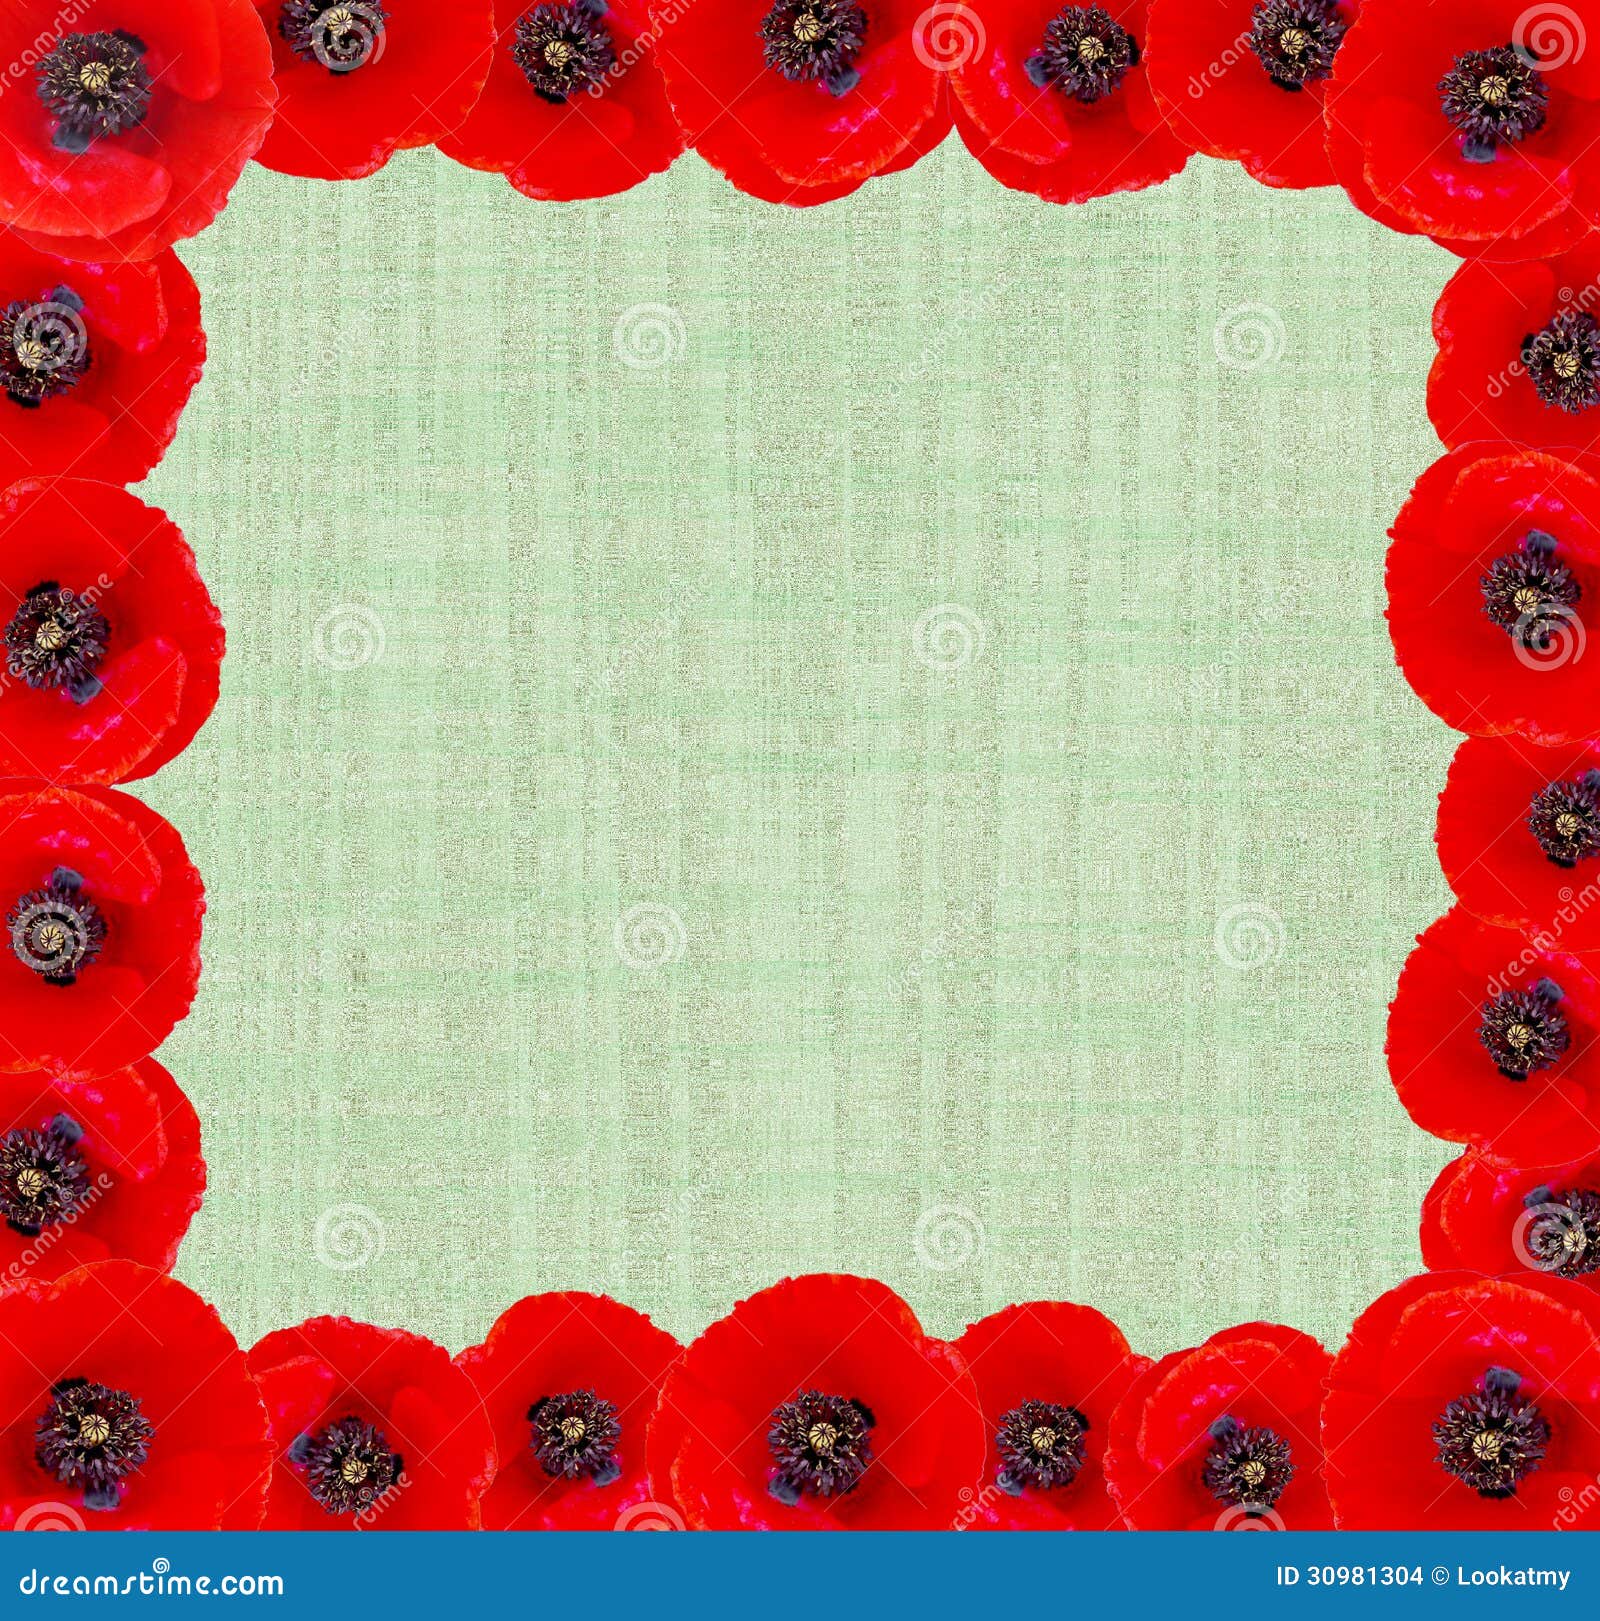 red poppies bordered background